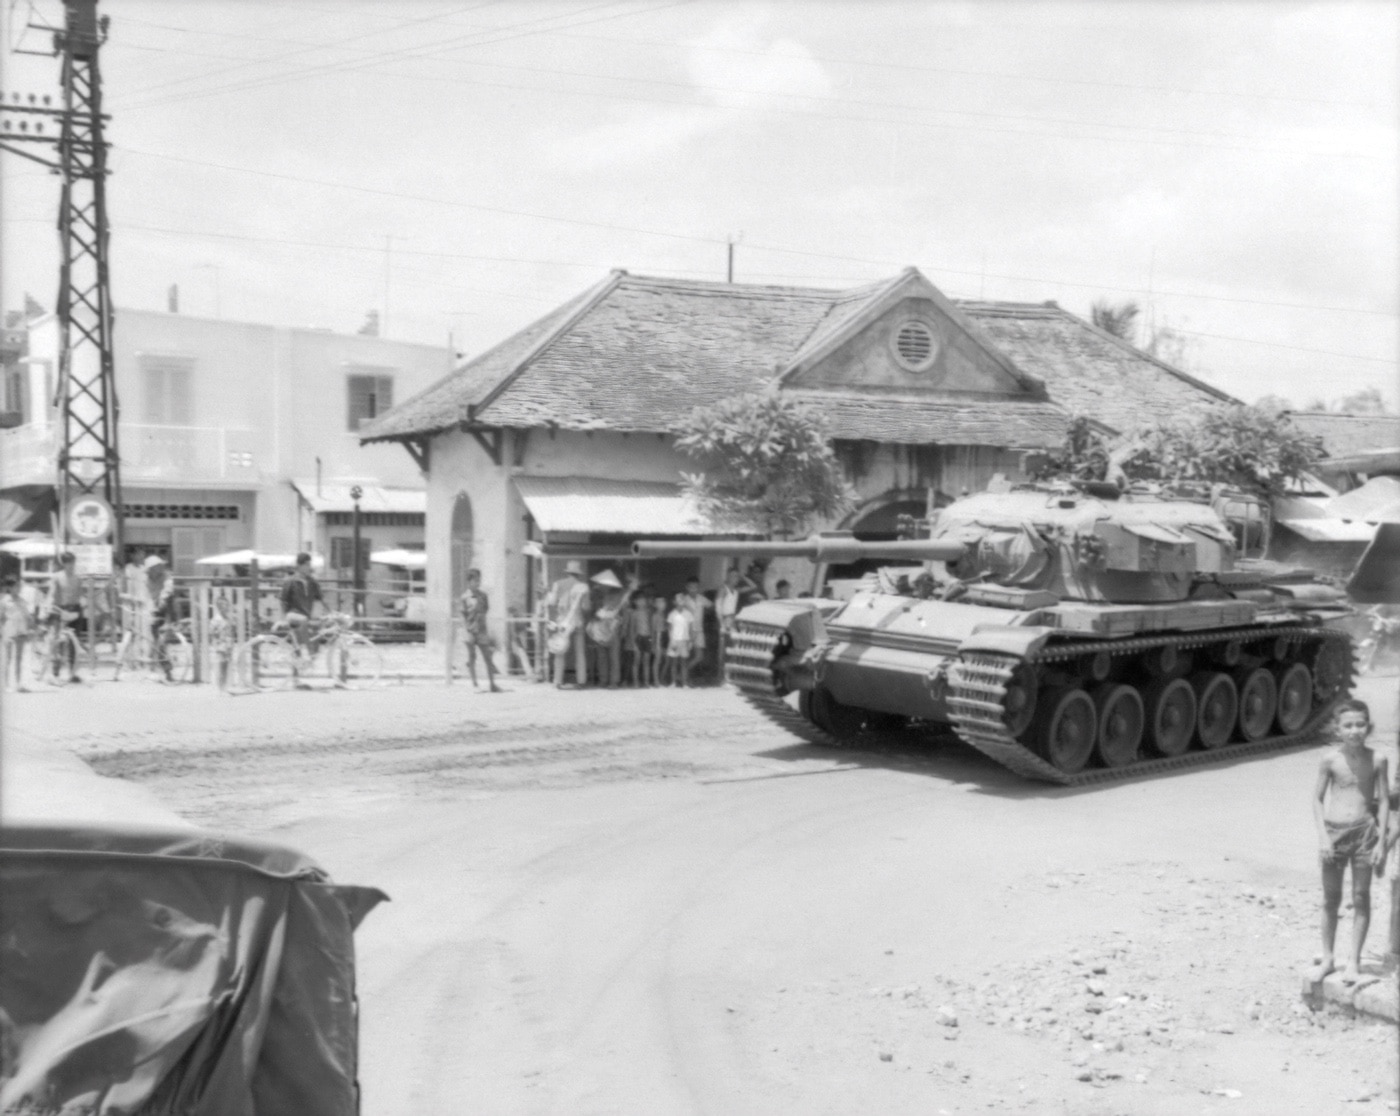 Here a Centurion MK 5/1 tank is shown on the move. The Australian tank was part of the 1st Australian Armoured Regiment (1AR). The tank was en route from Nui Dat to Fire Support Base Coral in Bien Hoa Province during the Second Indochina War. While some considered it an American war, many countries were involved directly and indirectly.